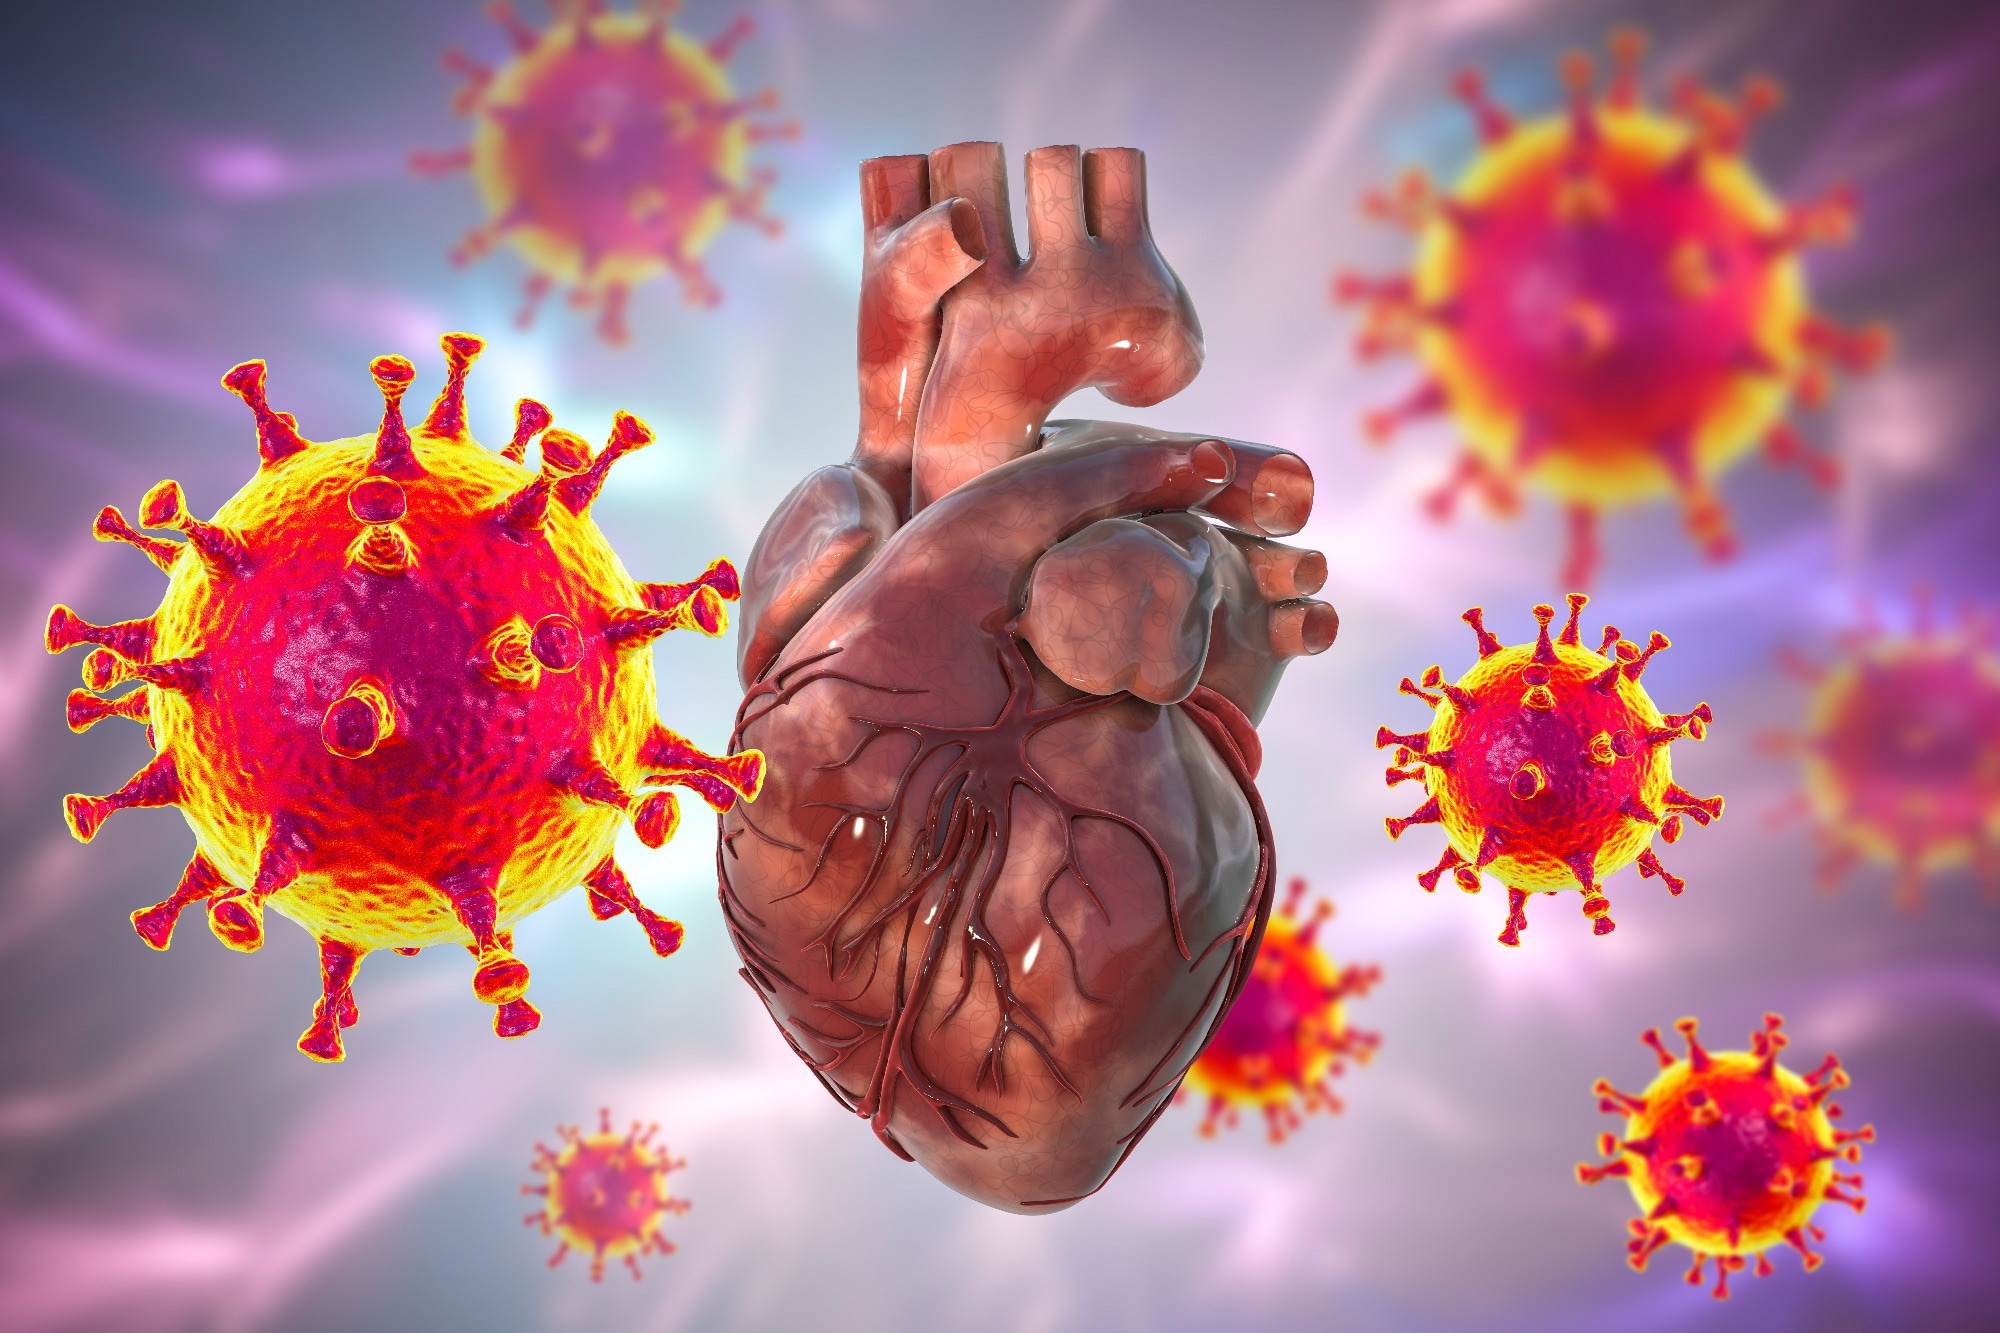 COVID pandemic triggered cardiovascular deaths to rise sharply